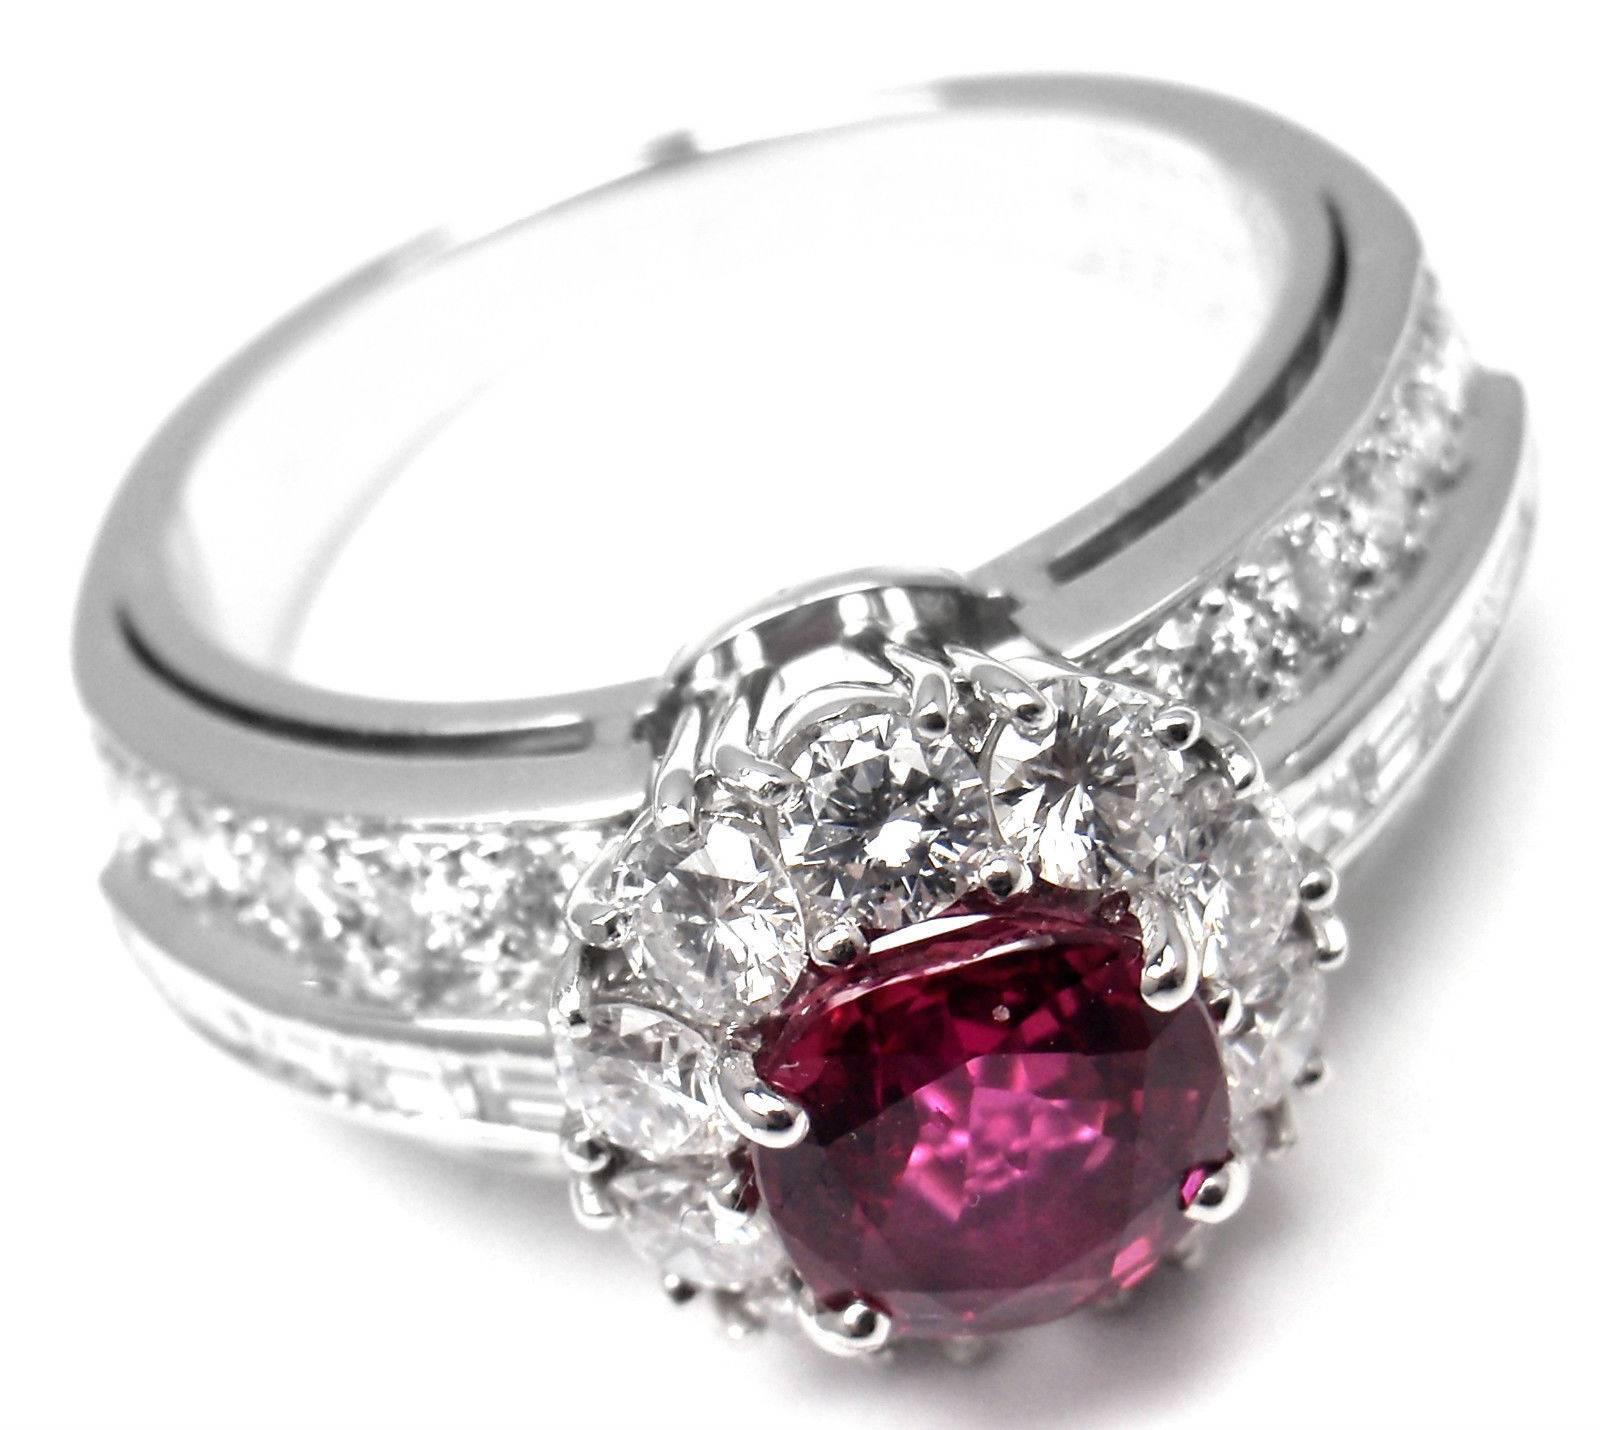 Platinum Diamond Ruby Ring by Van Cleef & Arpels.  
With 30 round brilliant cut diamonds VVS1 clarity, E color and 10 emerald cut diamonds VVS1 clarity, E color total weight approx. 1.50ct
no heat round ruby total weight approx. 1.20ct
 